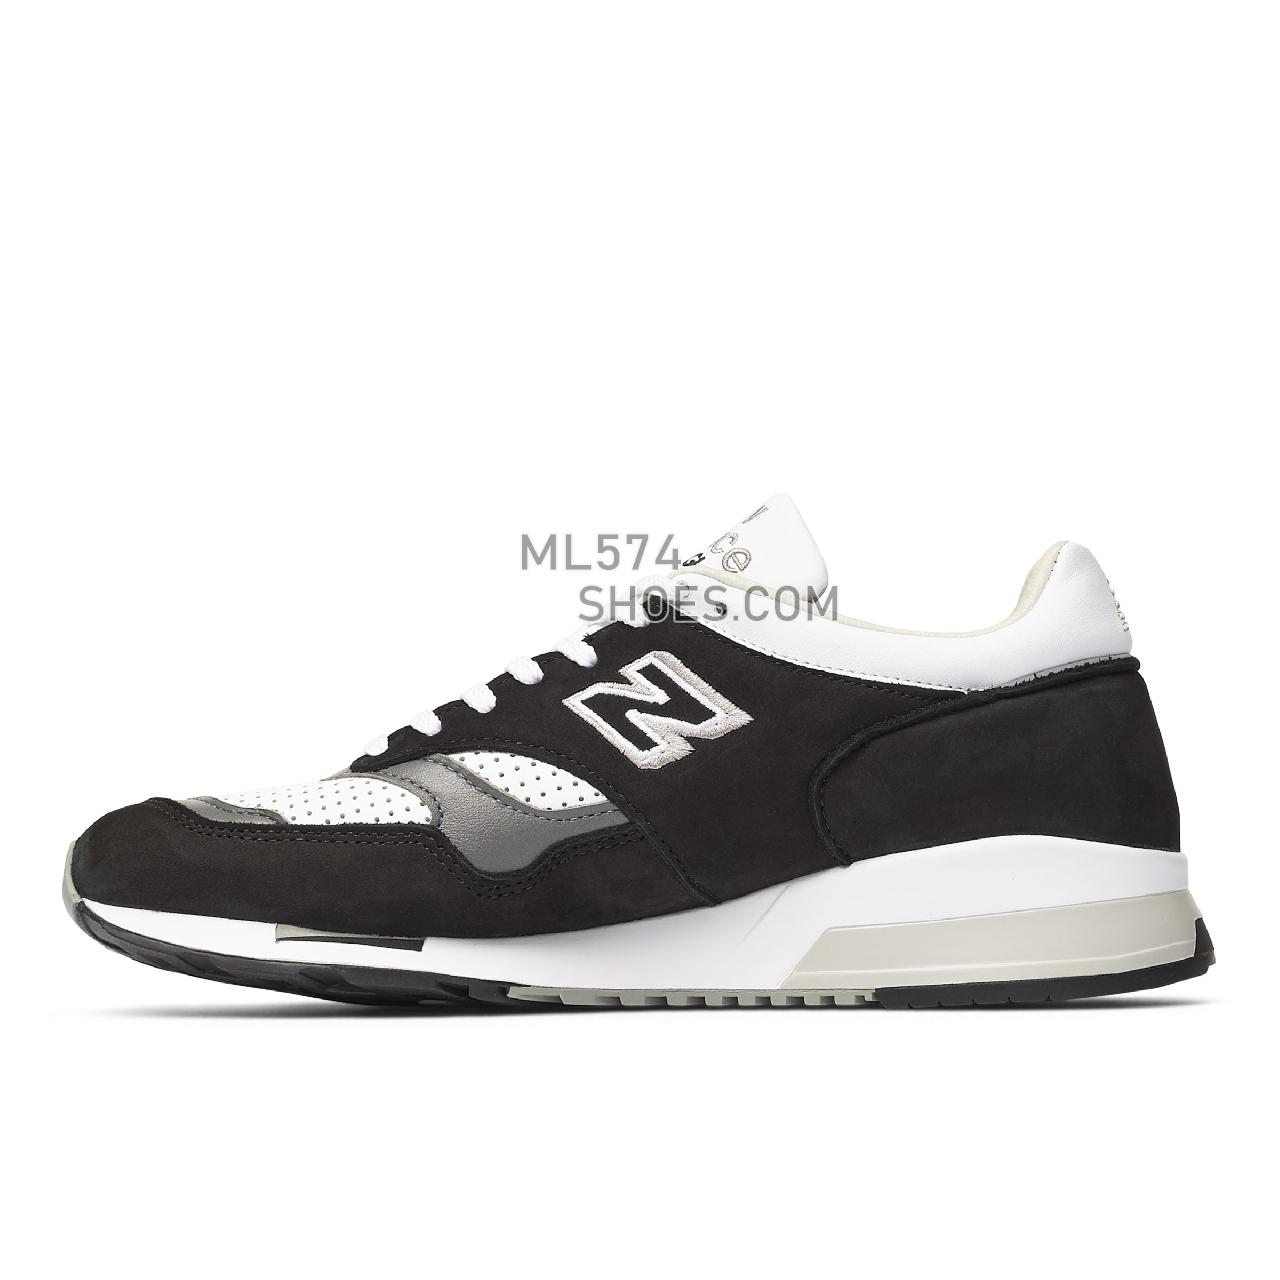 New Balance MADE in UK 1500 - Men's Made in USA And UK Sneakers - Black with White and Grey - M1500KGW